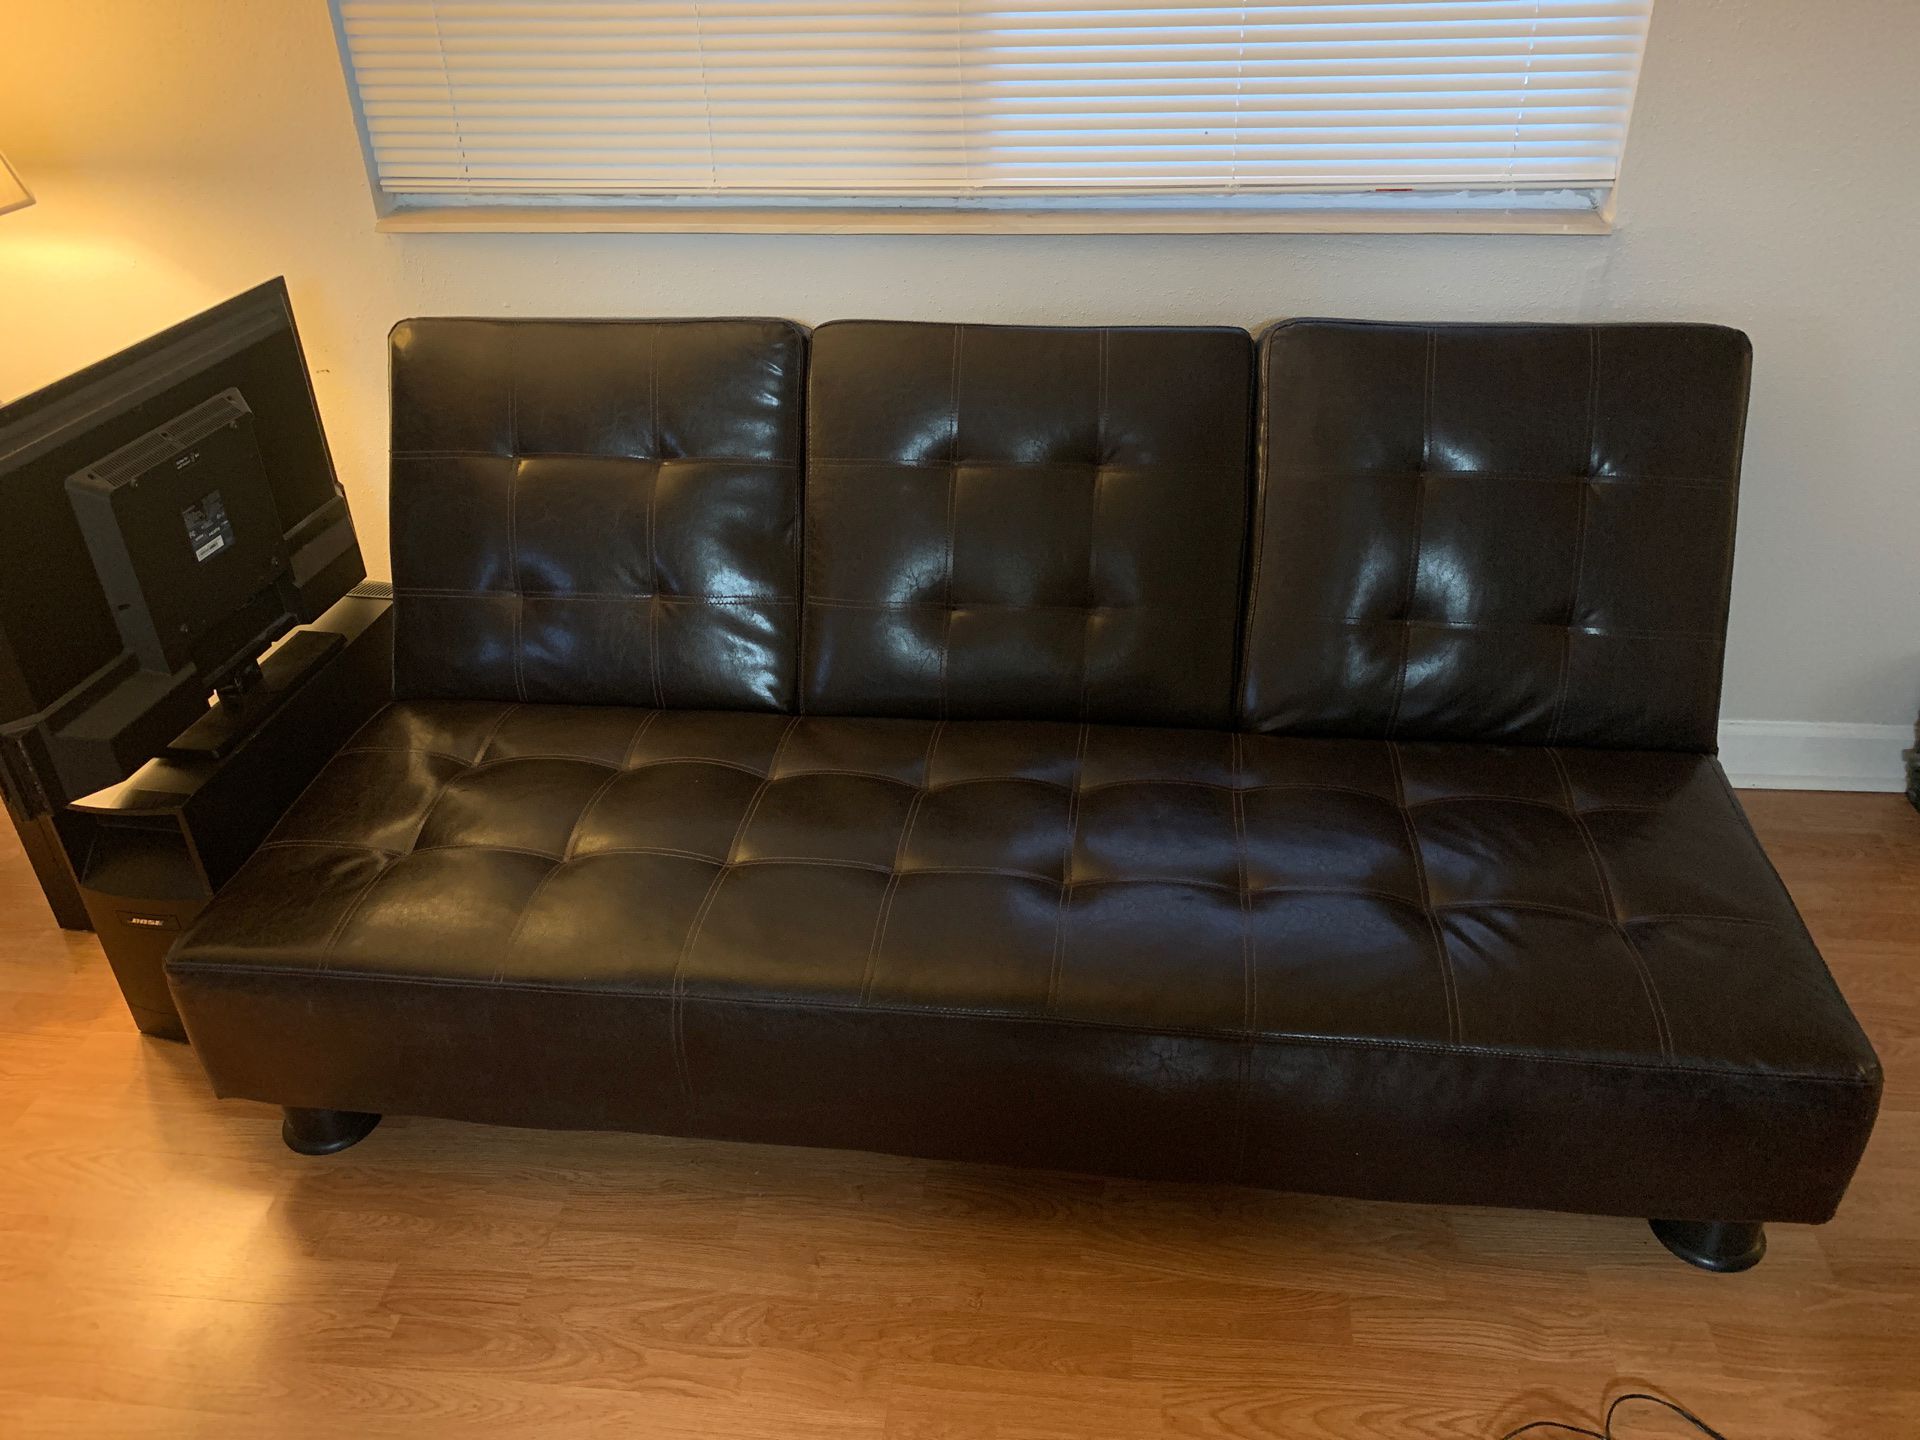 Reclinable leather futon. Good condition.